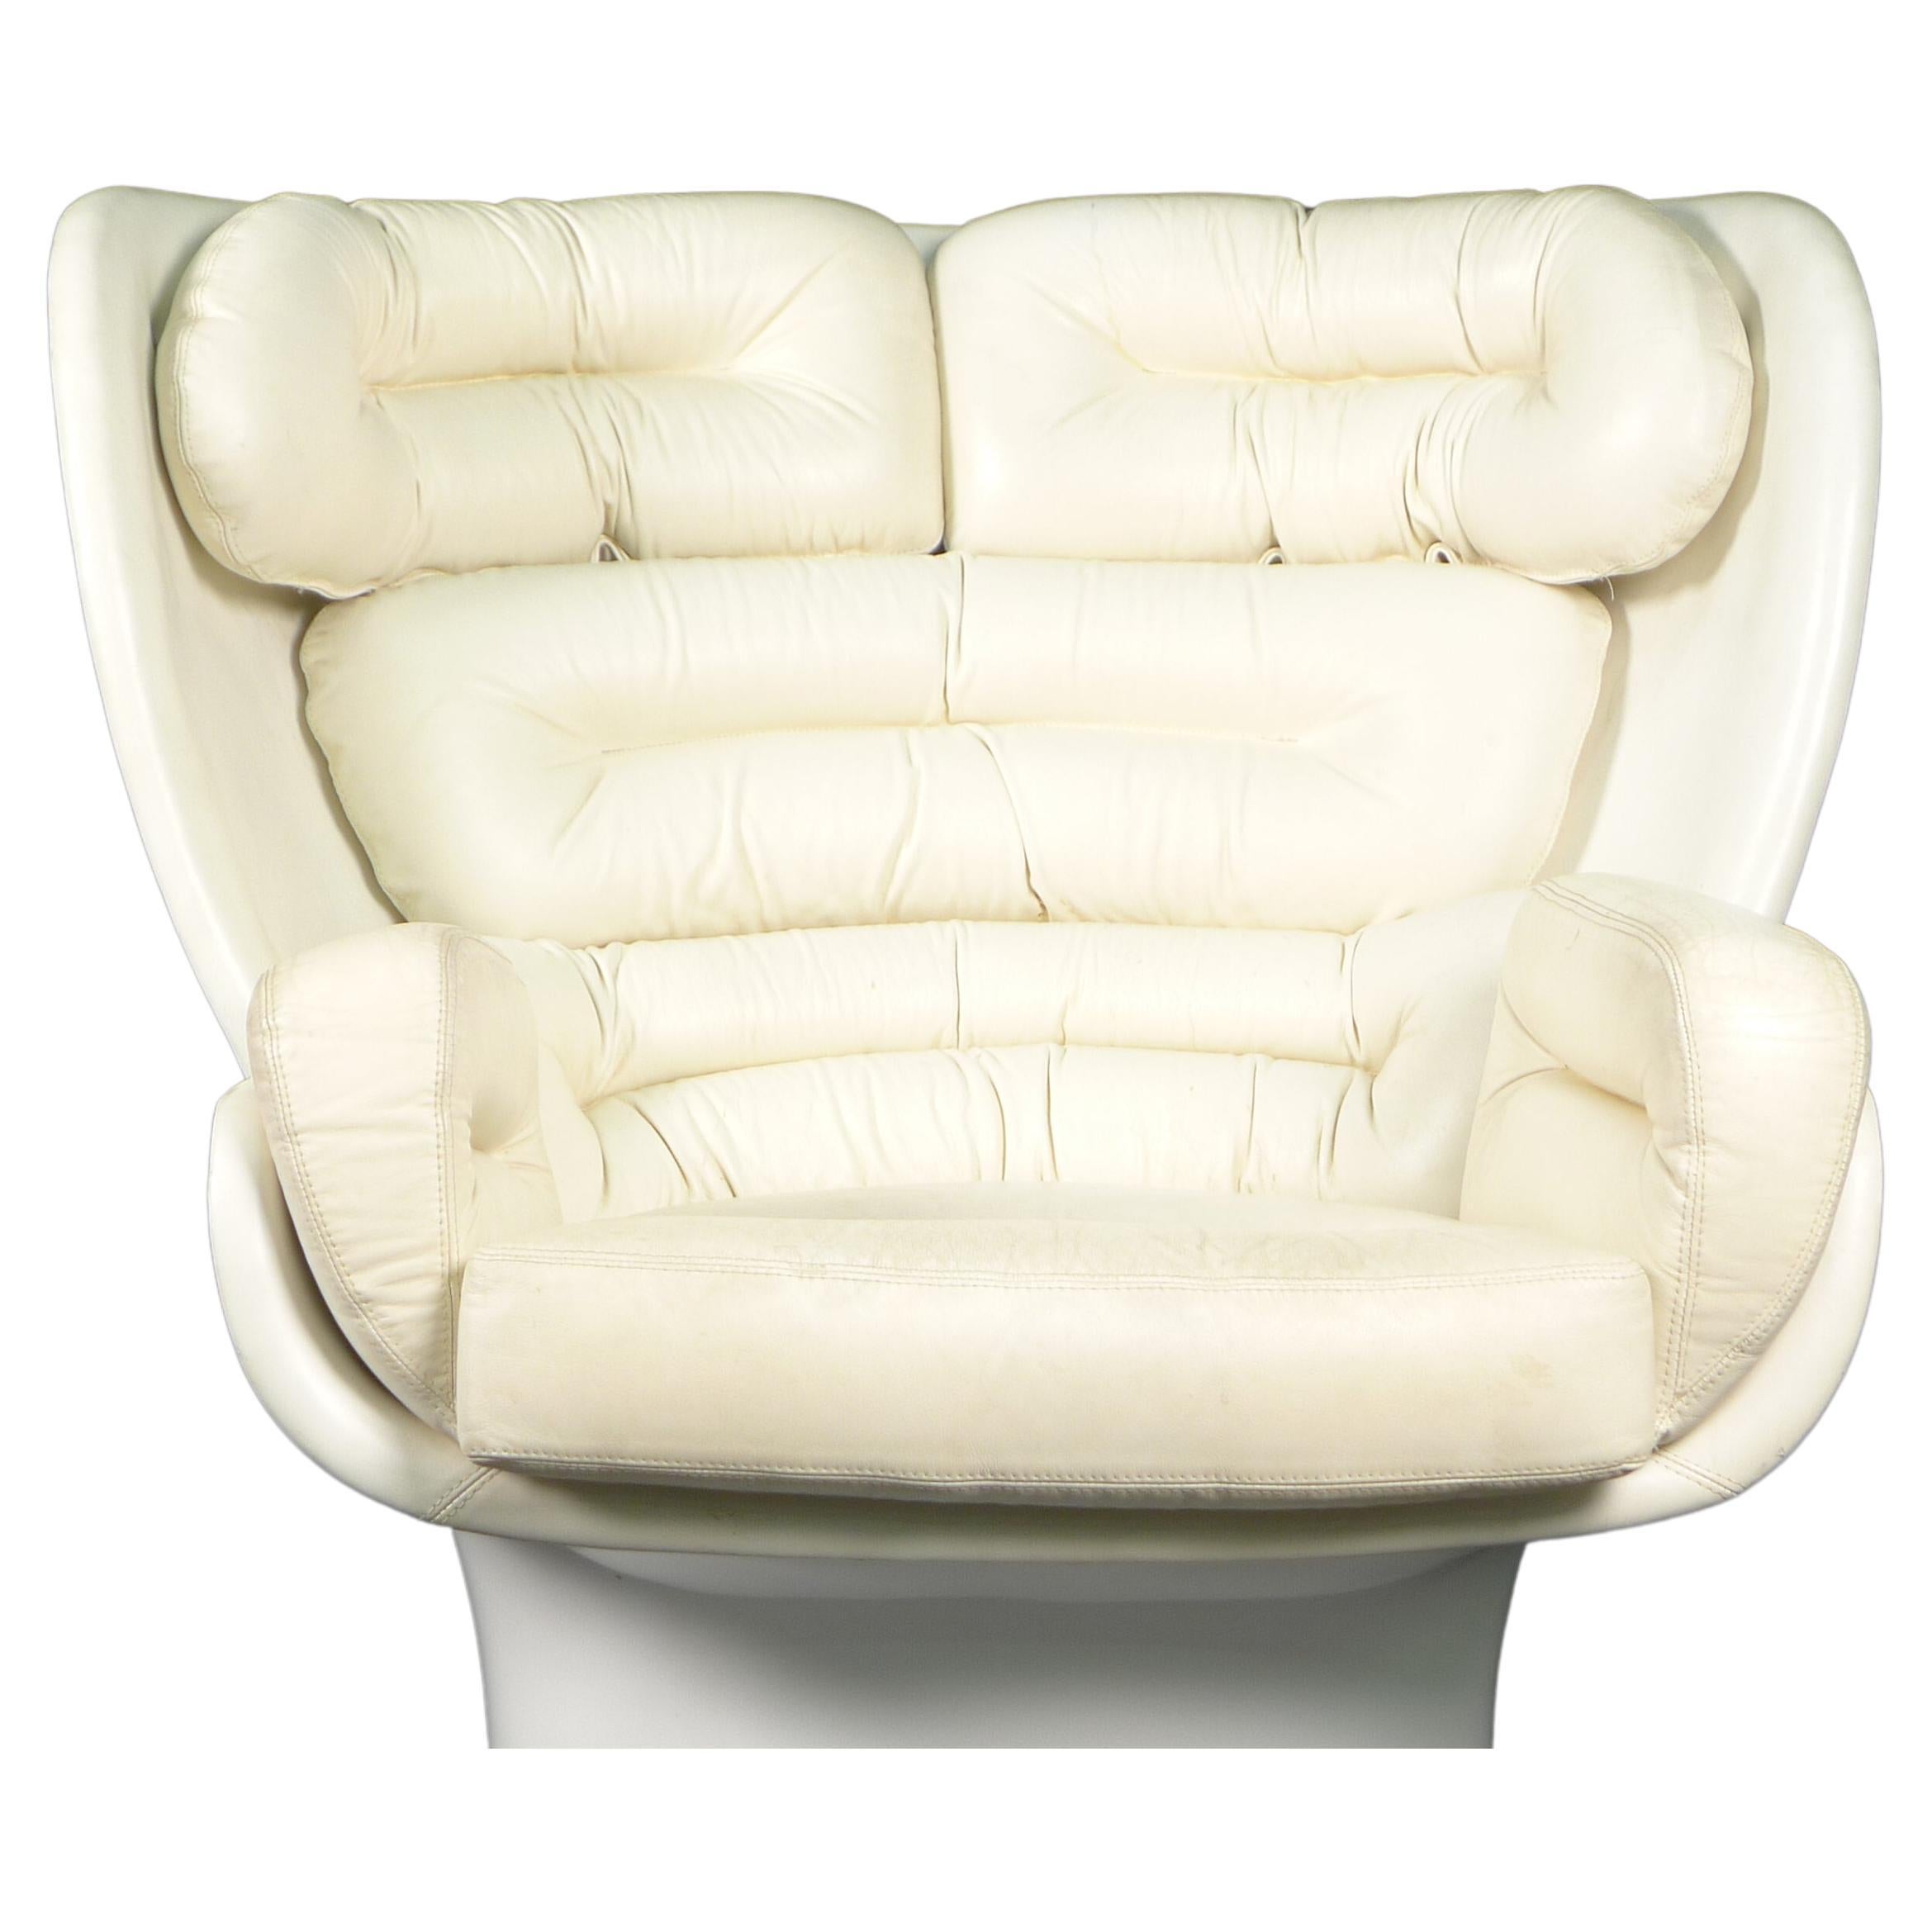 Joe Colombo 'Elda' Lounge Chair, White Leather and Fibreglass, by Comfort, Italy